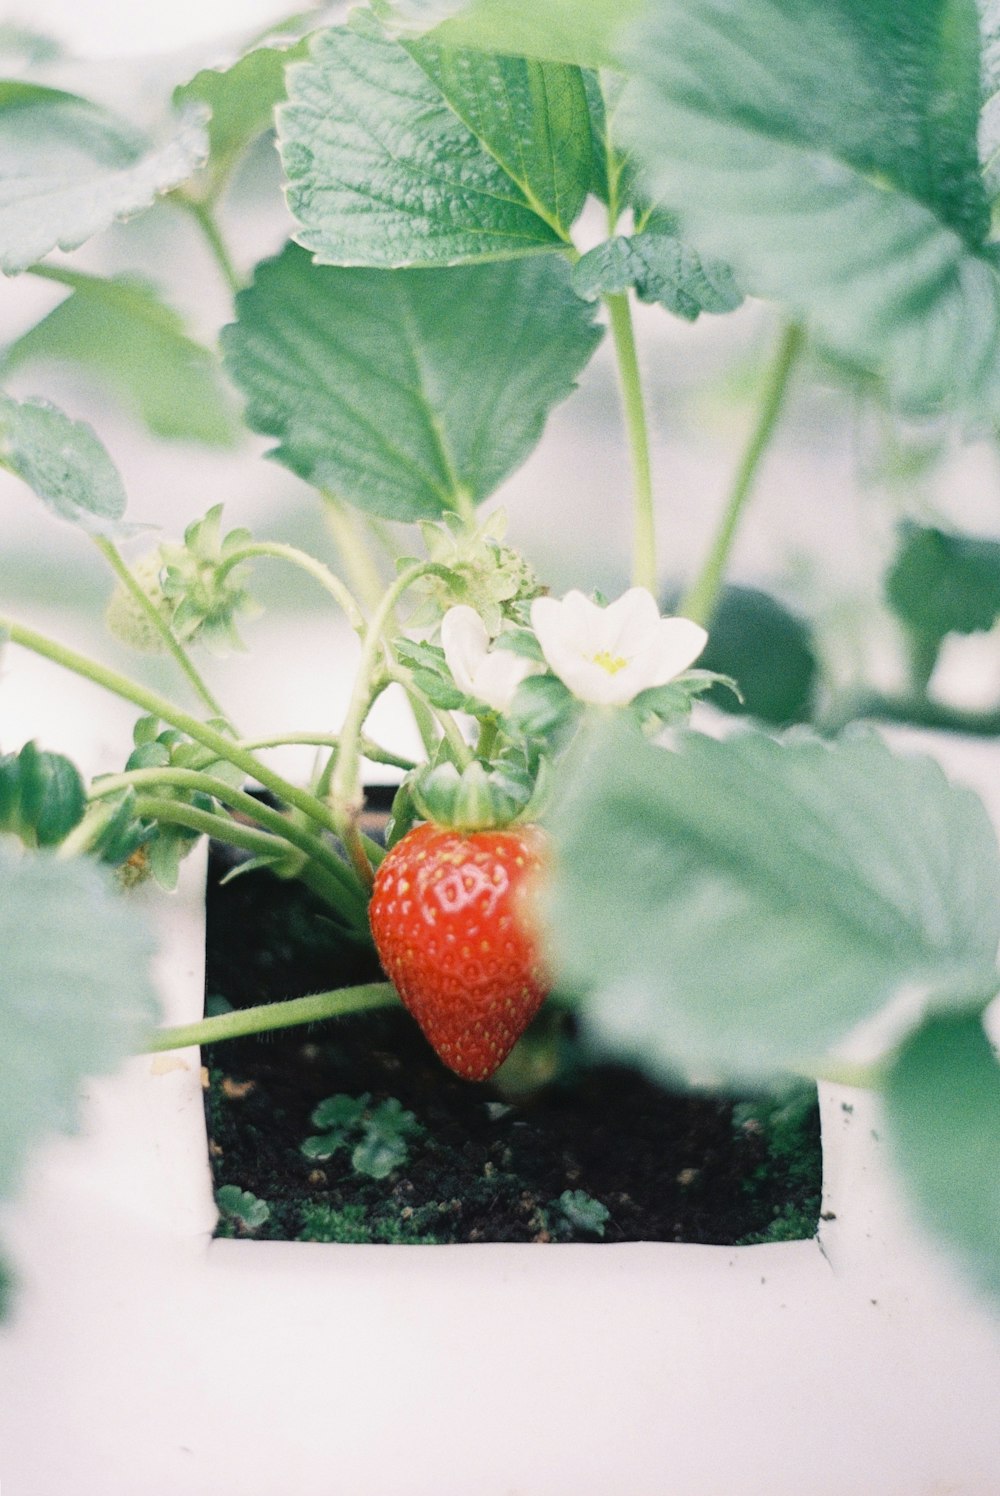 a strawberry growing in a pot on a table